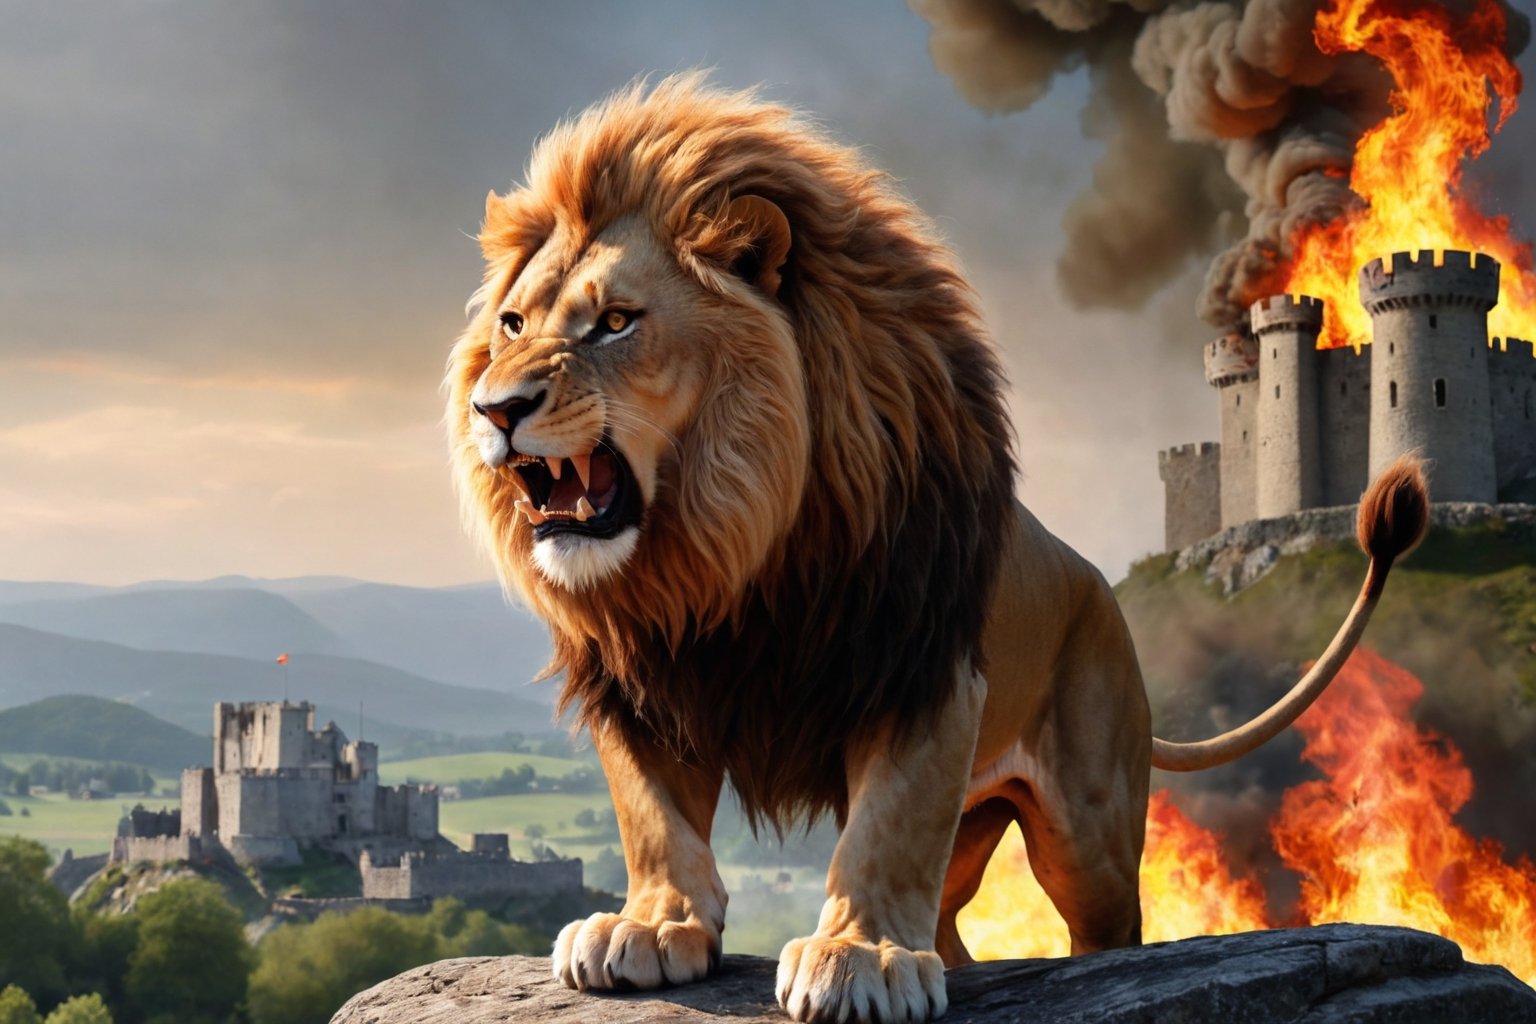 Lion with a flaming mane roaring defiantly at an army on top of a rock, in the background the remains of a castle destroyed by war.